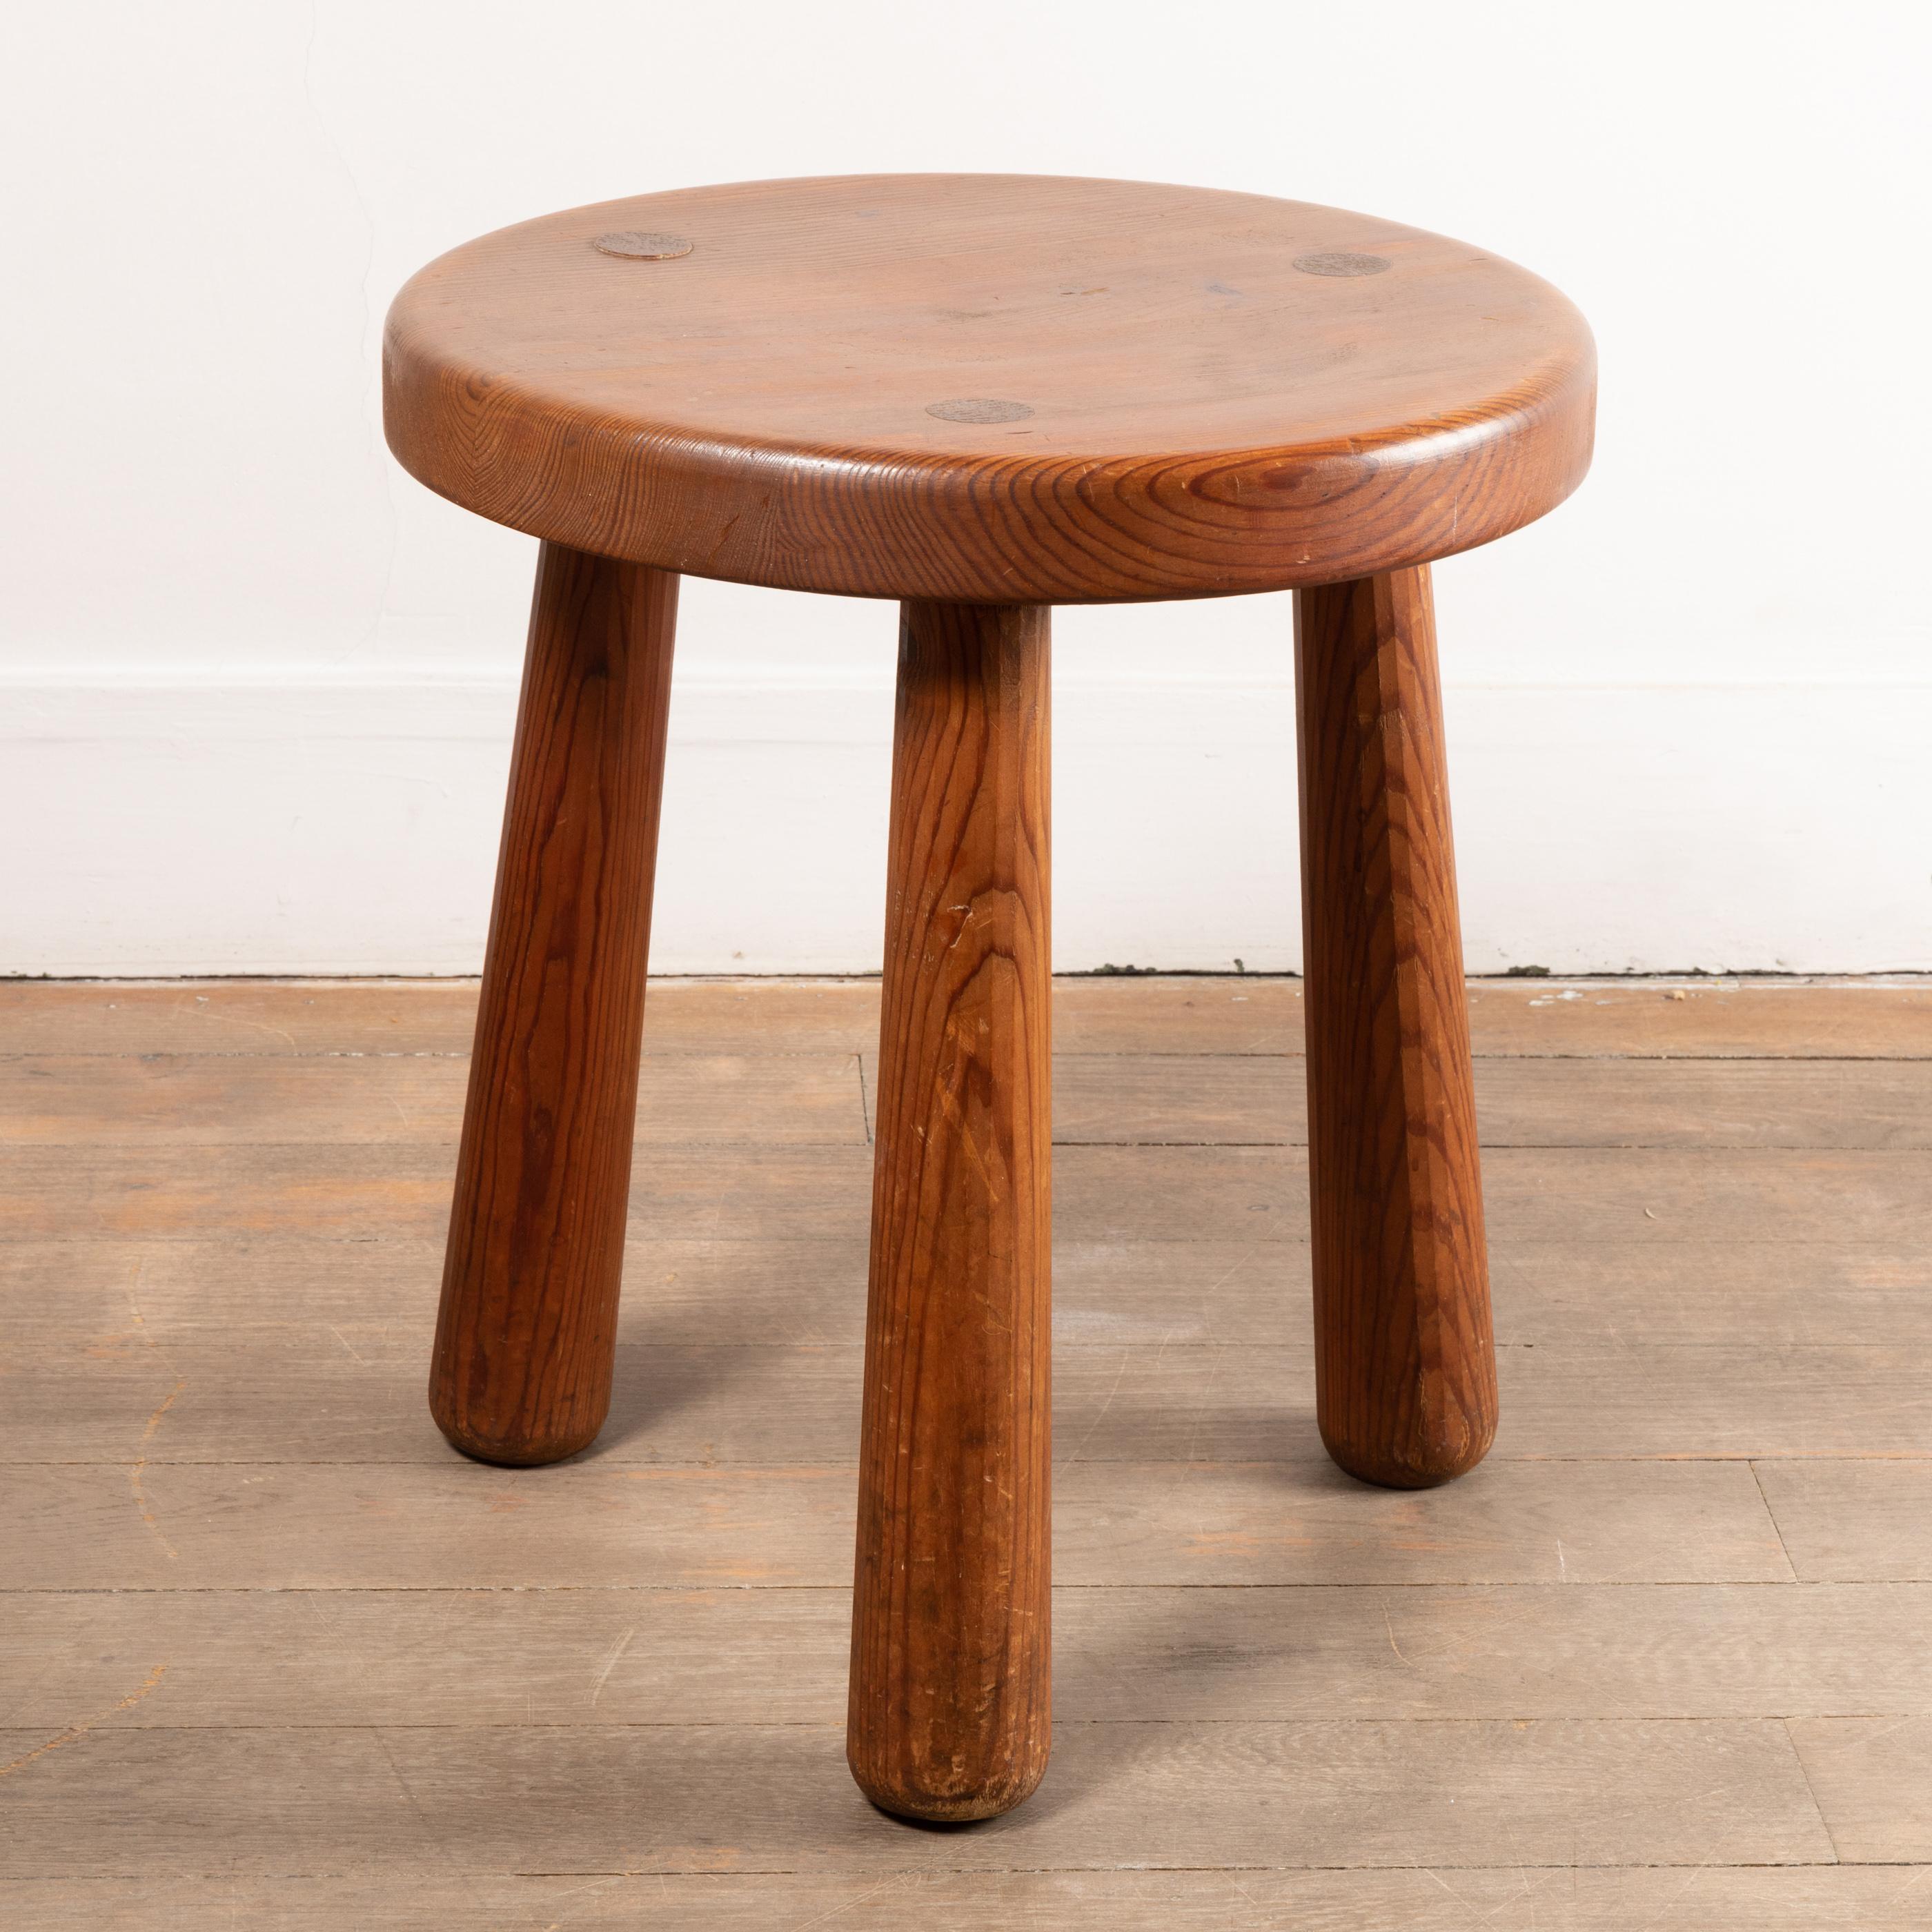 A wood tripod stool or side table
in the style of Charlotte Perriand
France, 1960's

Measures: Height: 45.5 cm / 17.9 in.
Diameter: 40 cm / 15.7 in.